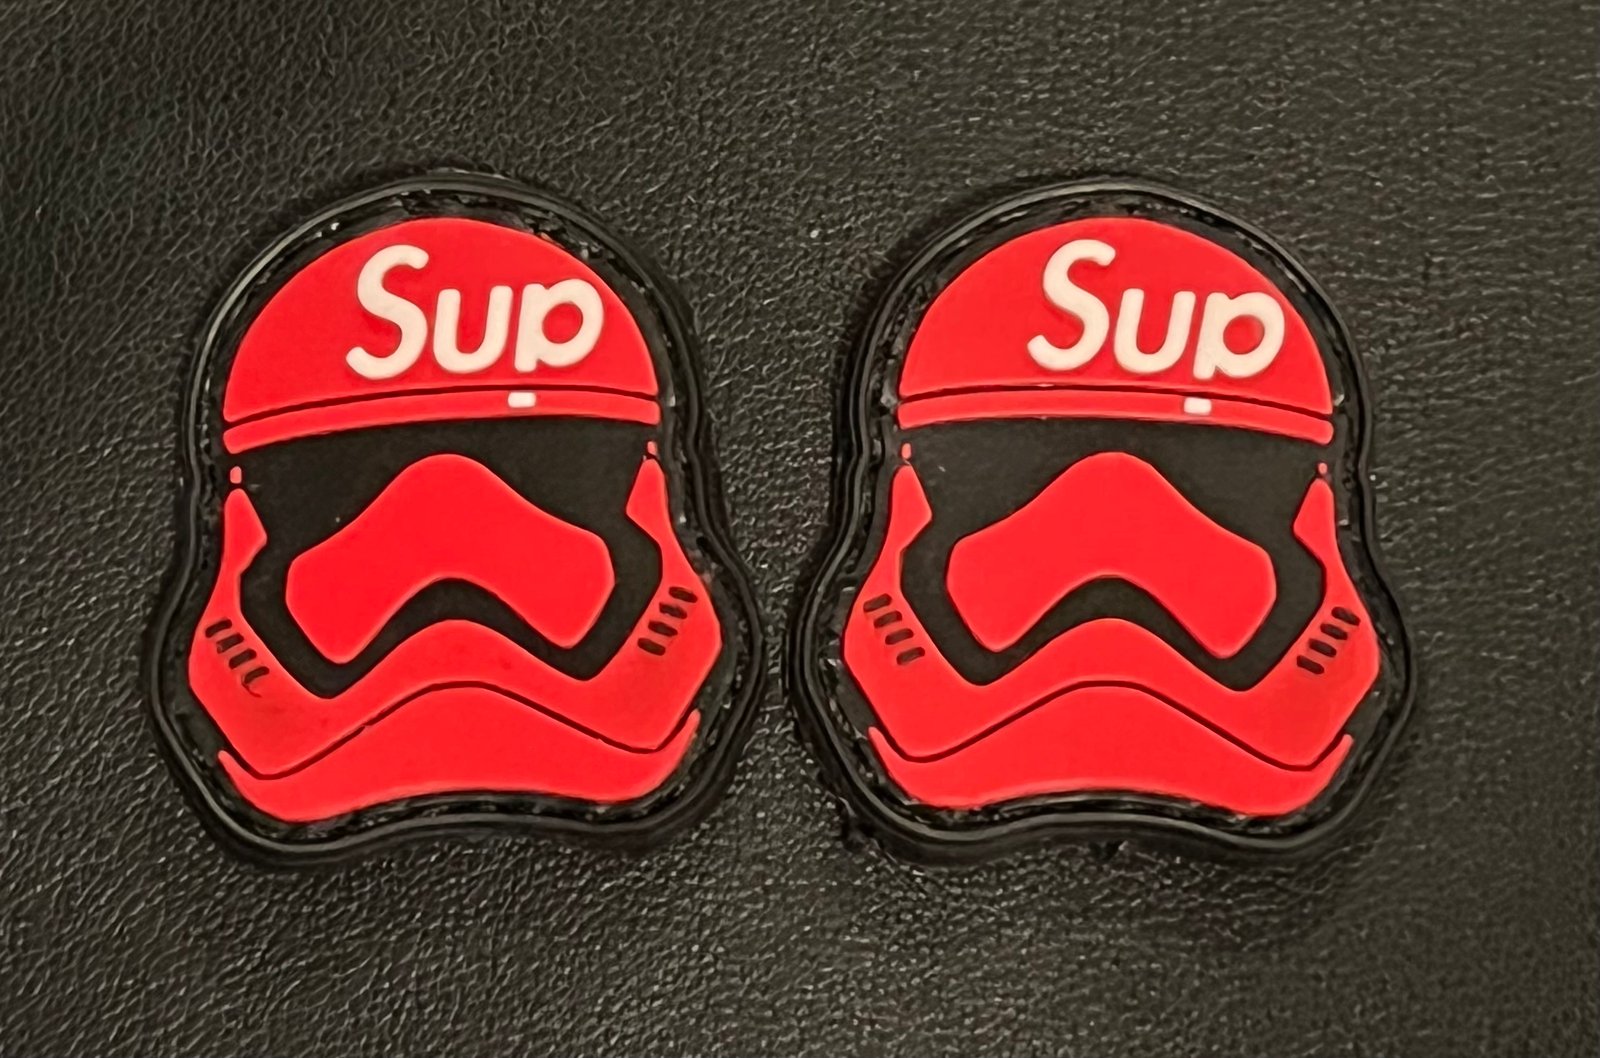 Red'Supreme'Imposter  Supreme wallpaper, Yoda pictures, Iphone wallpaper